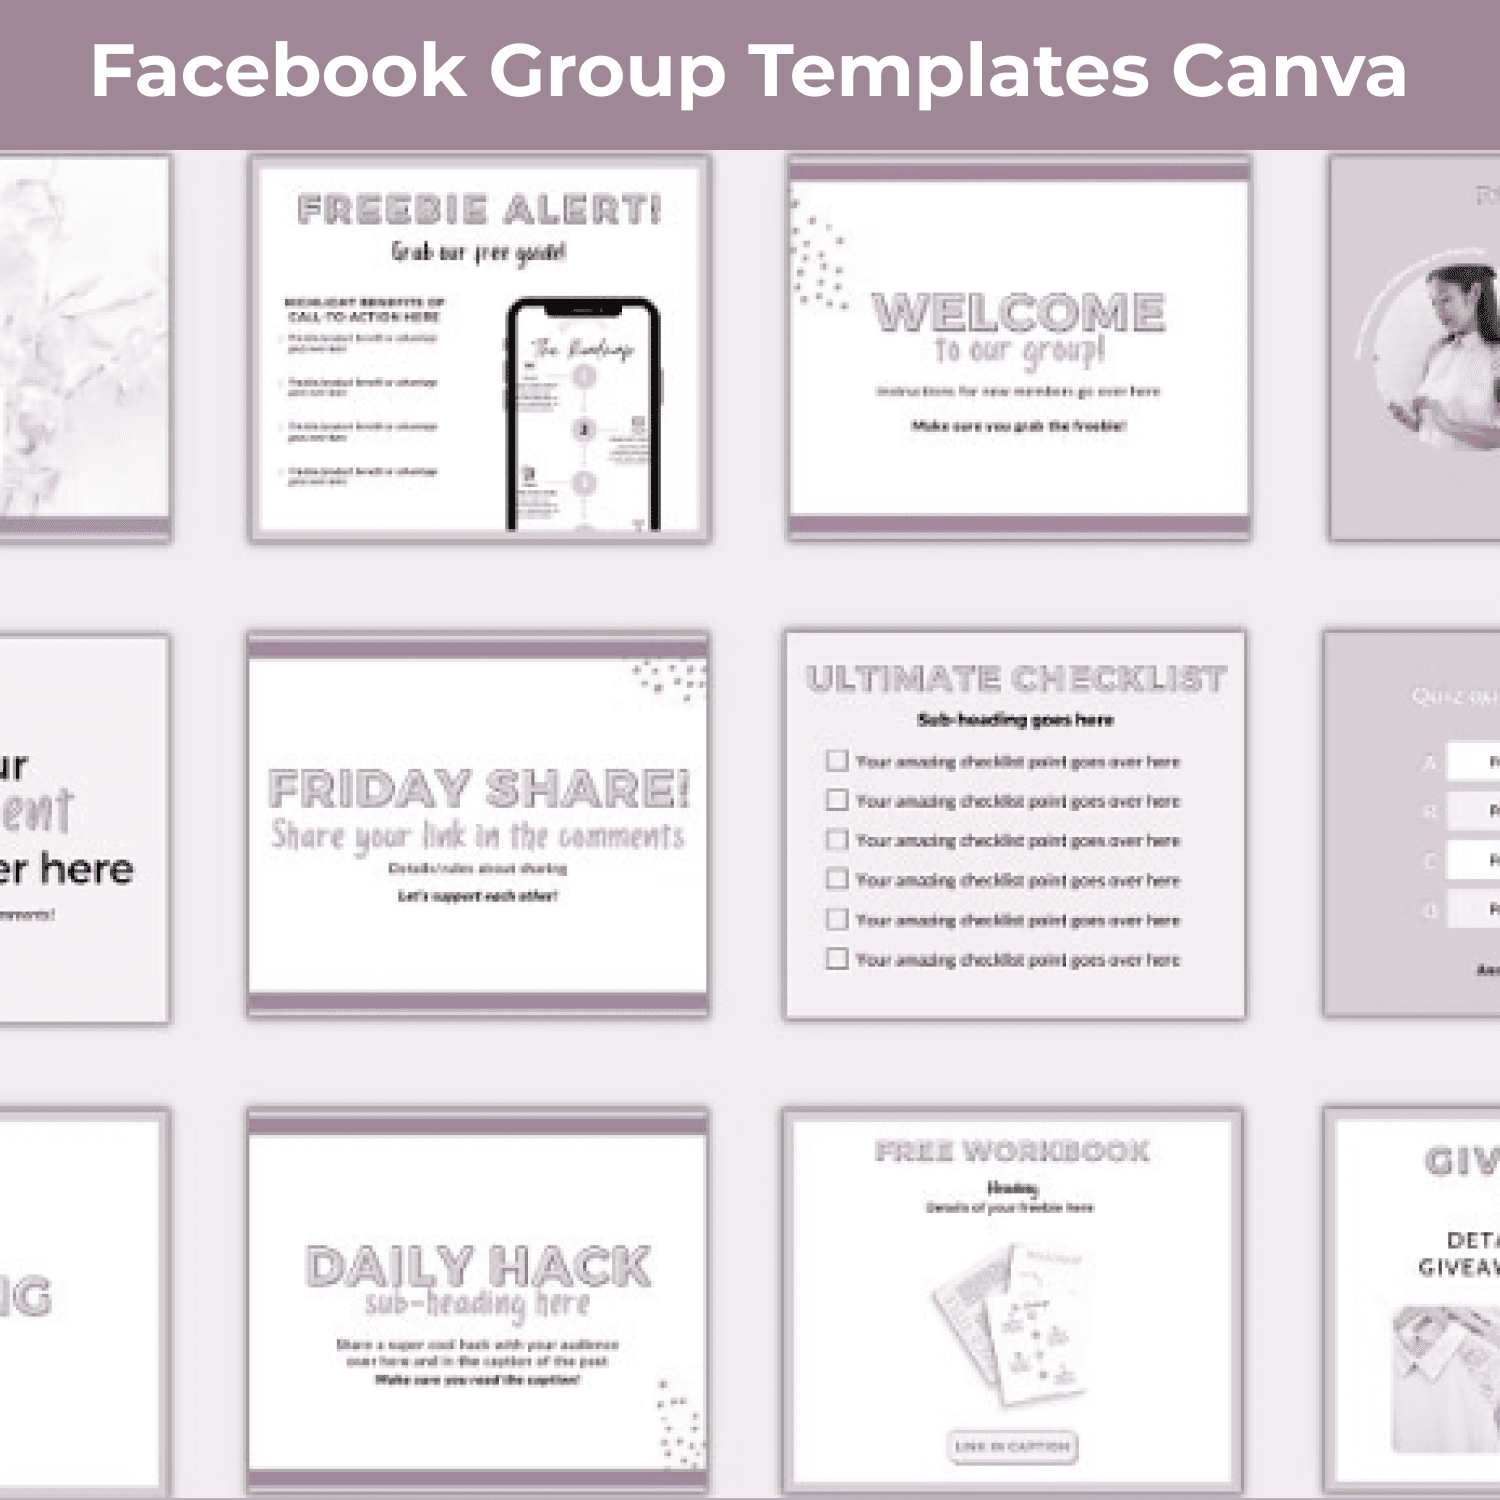 Facebook Group Templates Canva main cover.